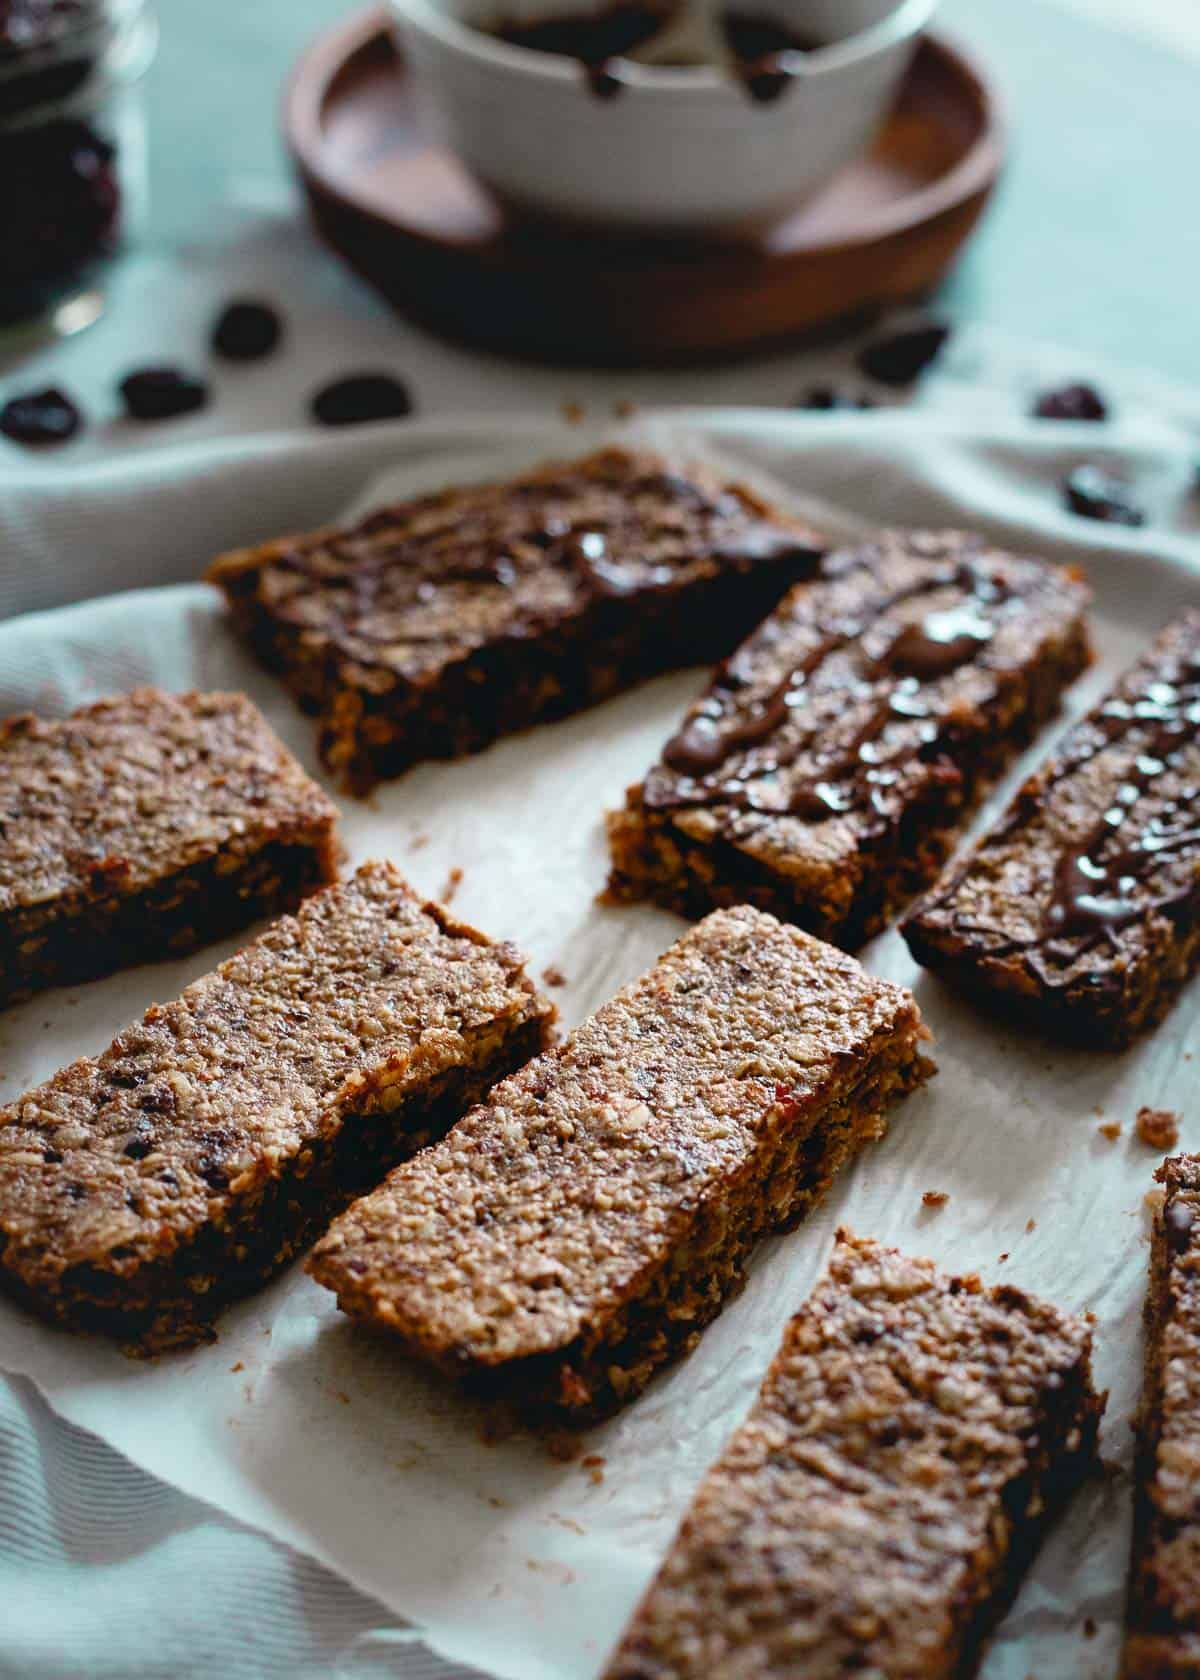 Perfect for eating on the go, these chewy tart cherry oat bars are not only tasty but good for you too!